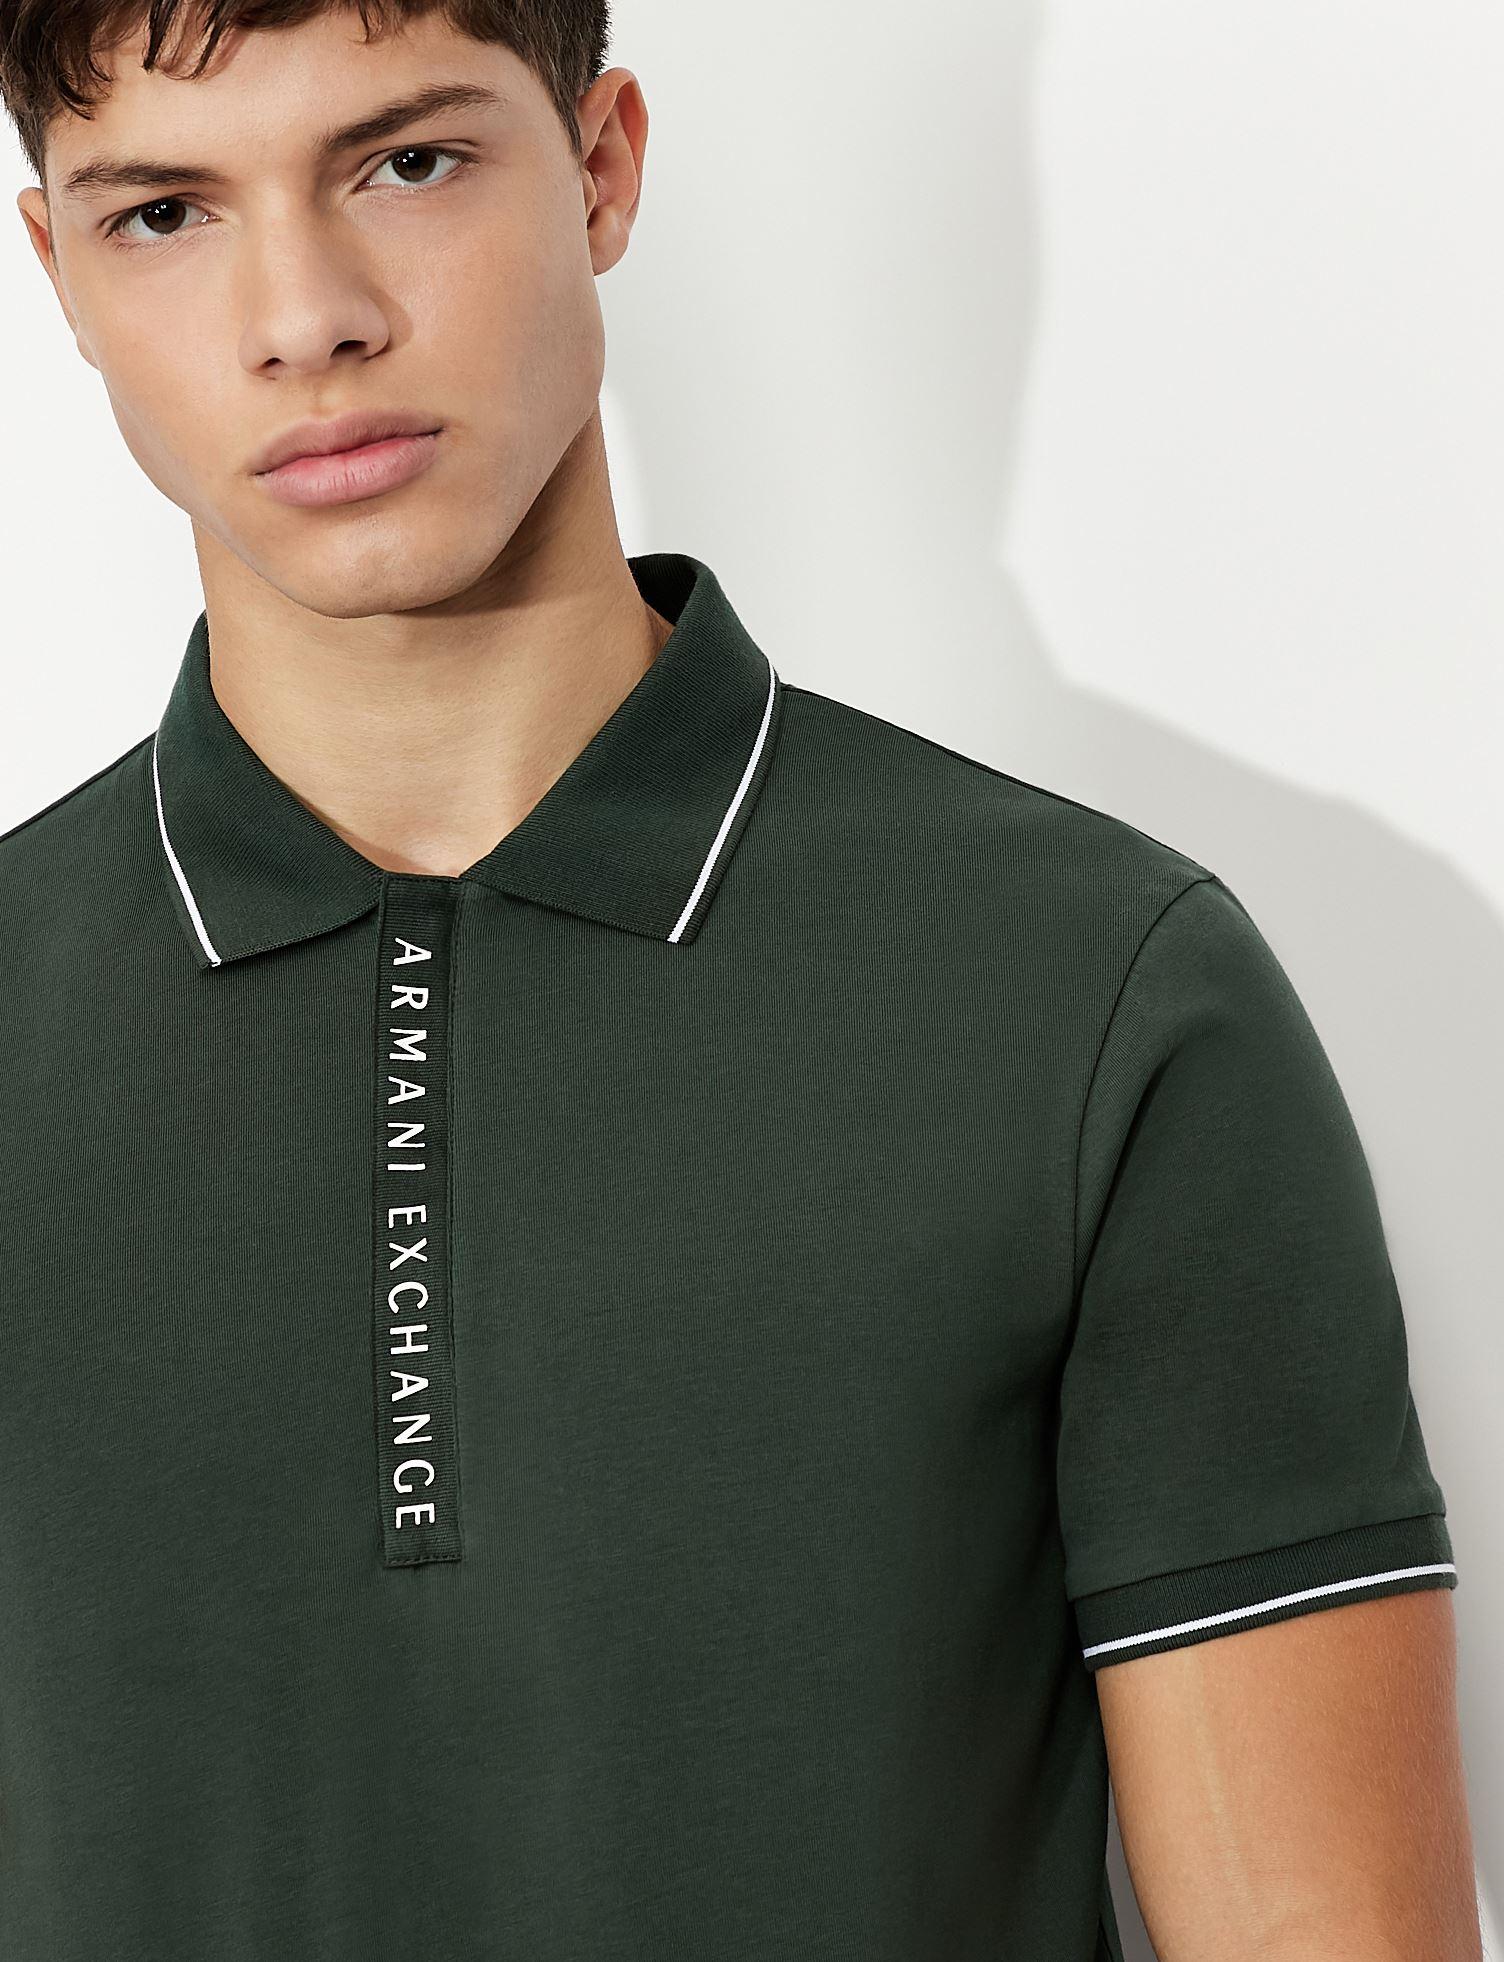 Armani Exchange Slim Fit Stretch Cotton Polo Shirt in Emerald Green (Green)  for Men - Lyst